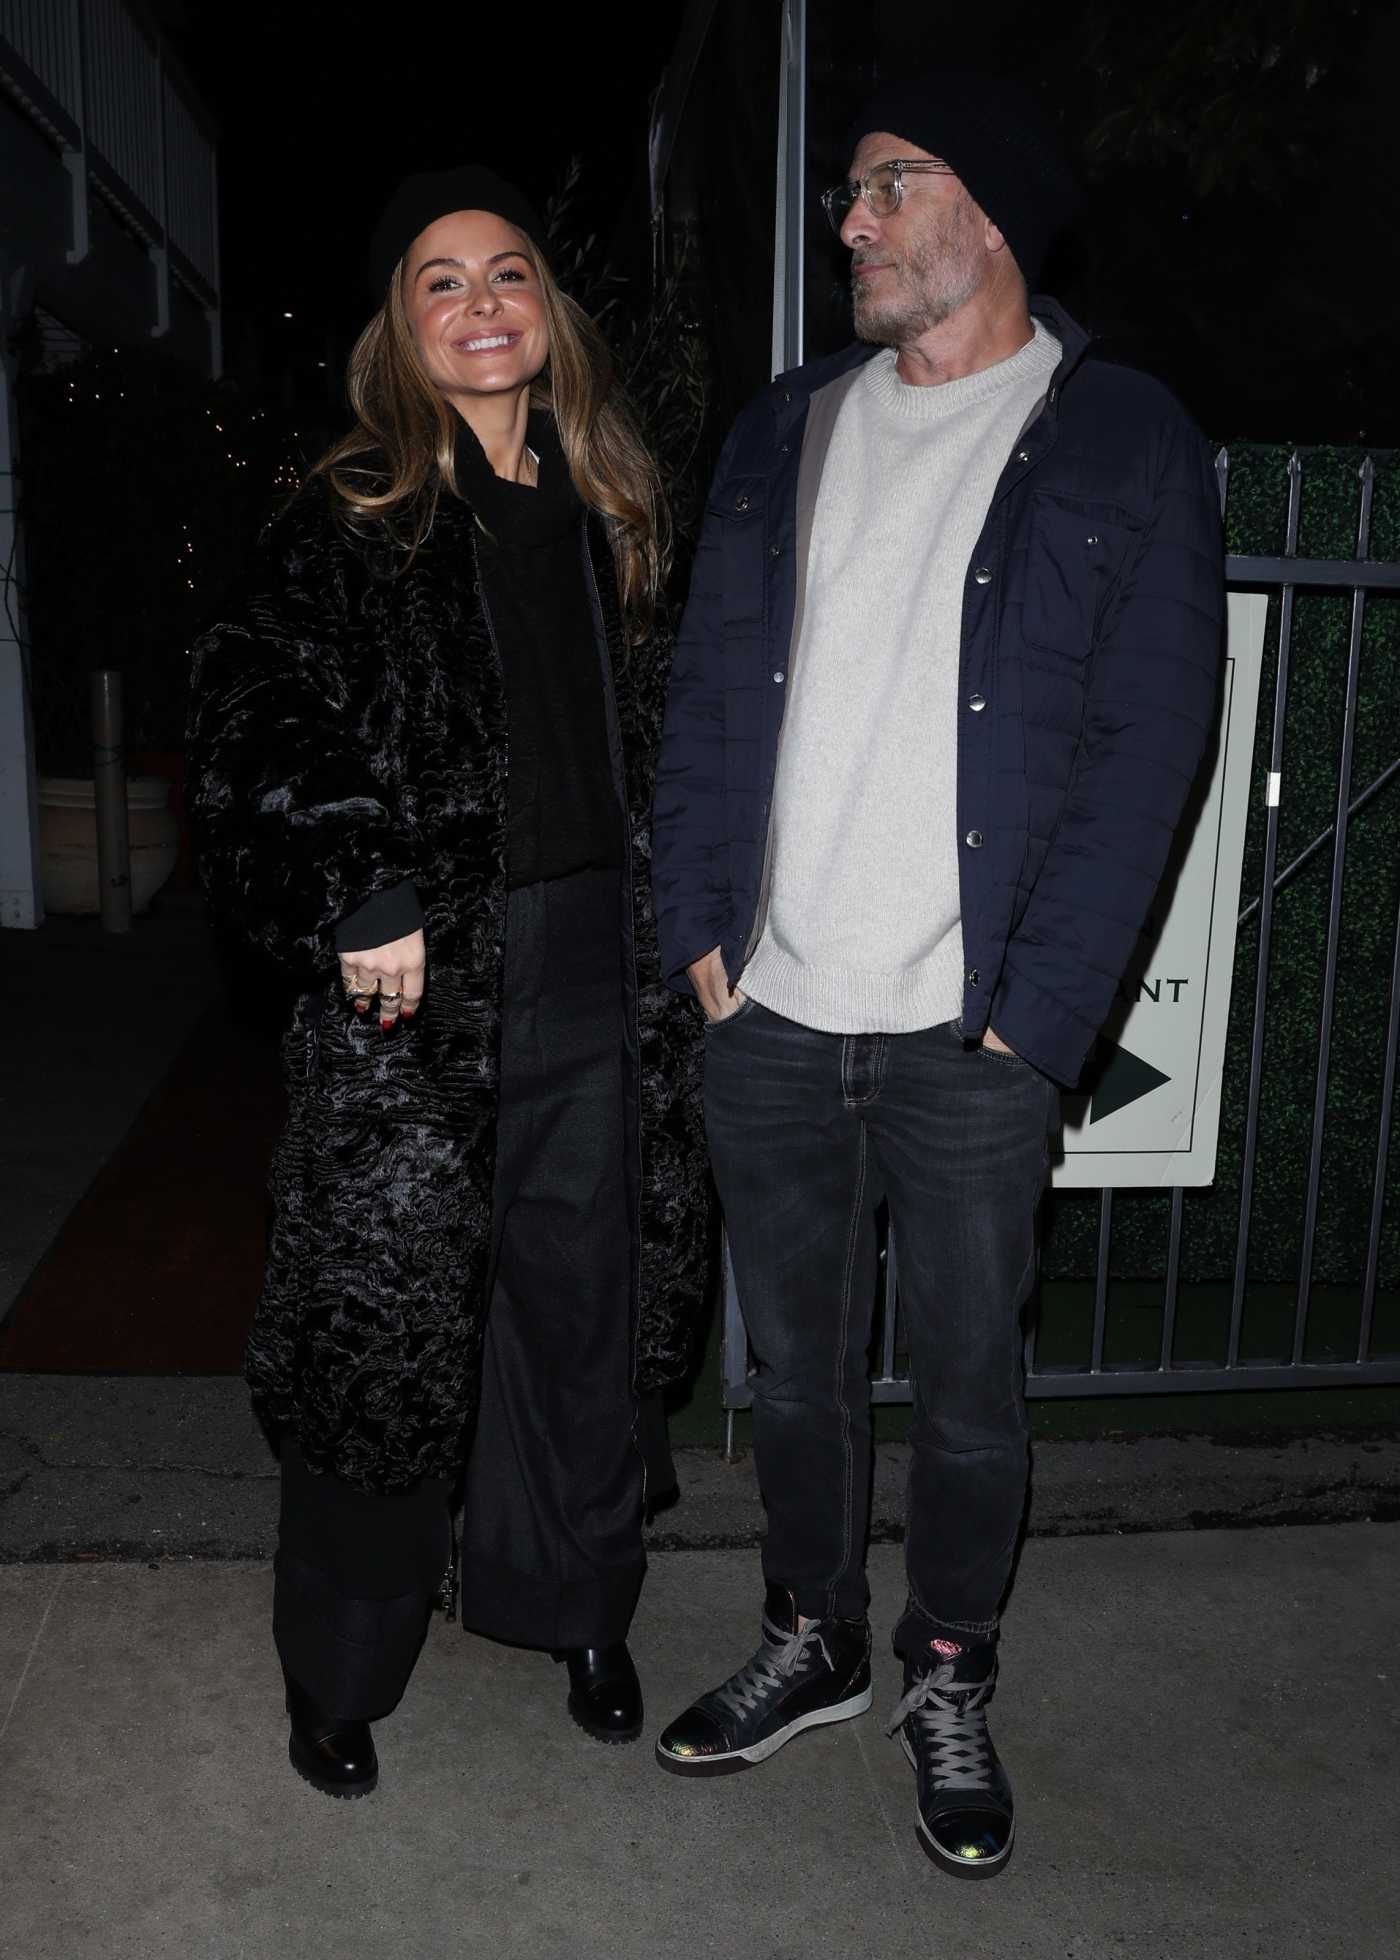 Maria Menounos in a Black Fur Coat Says Her Goodbyes After Dinner with a Male Friend at Giorgio Baldi in Santa Monica 12/15/2021